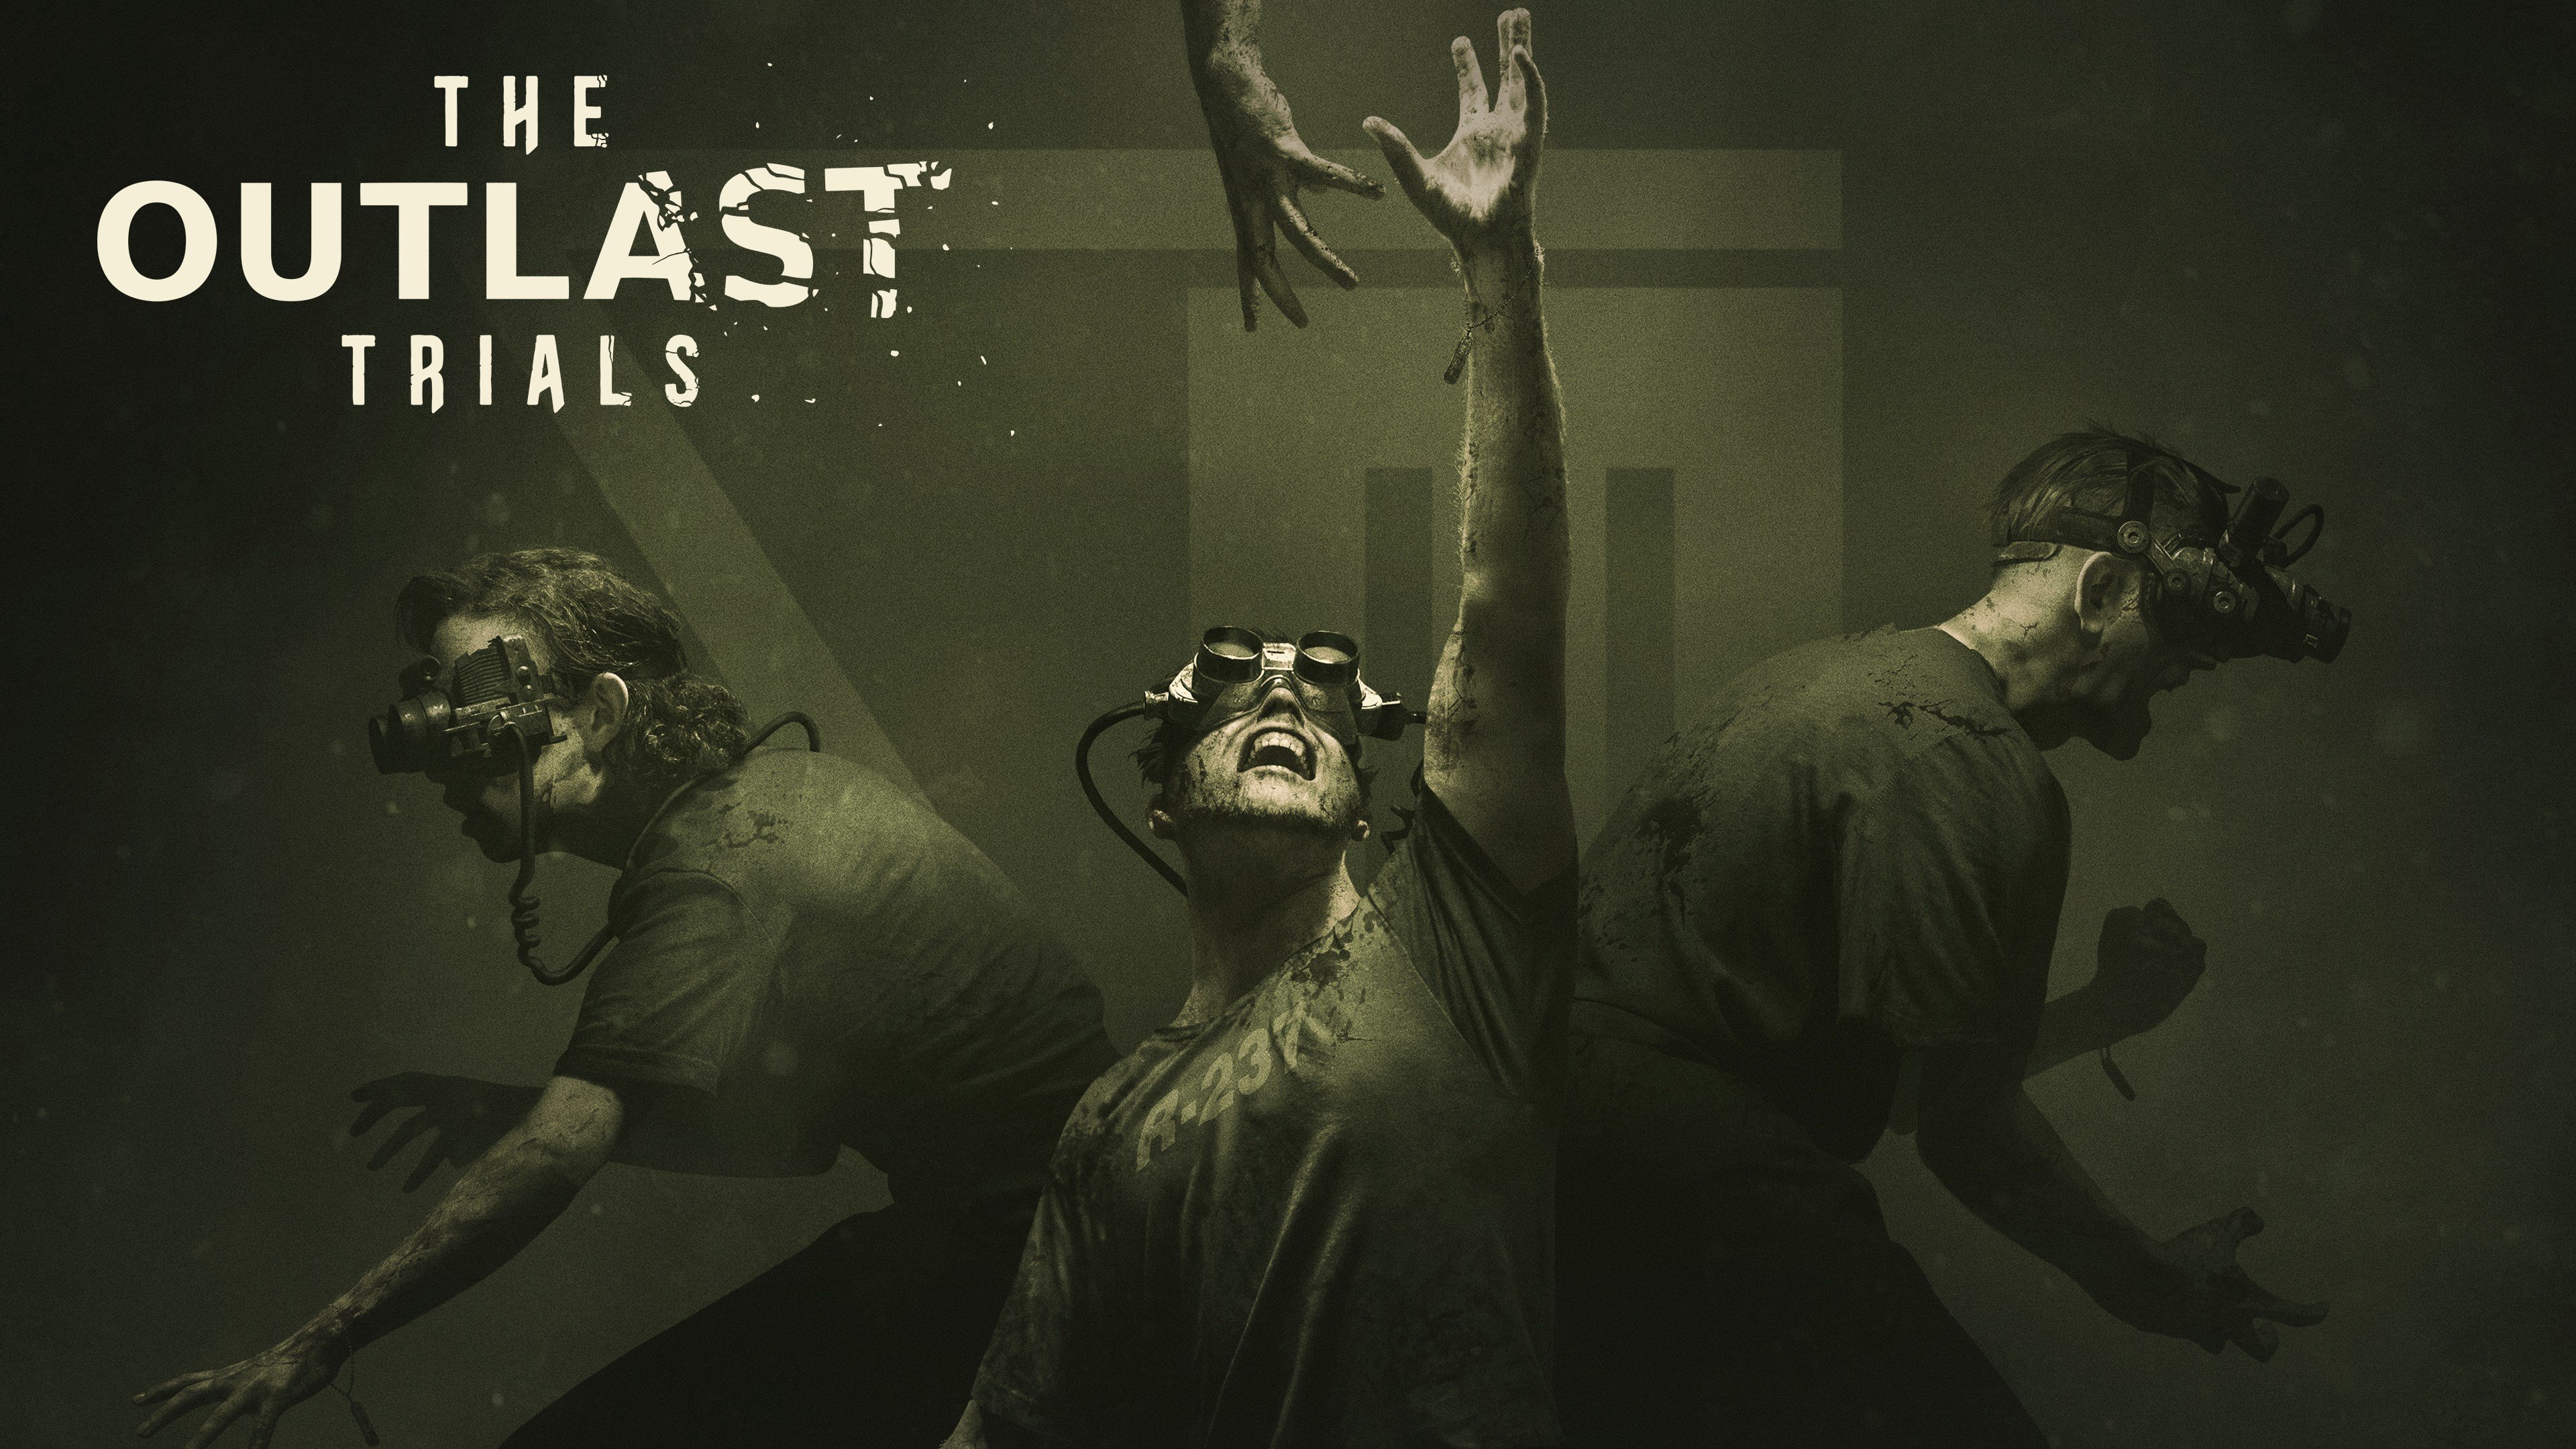 The Outlast Trials cover image